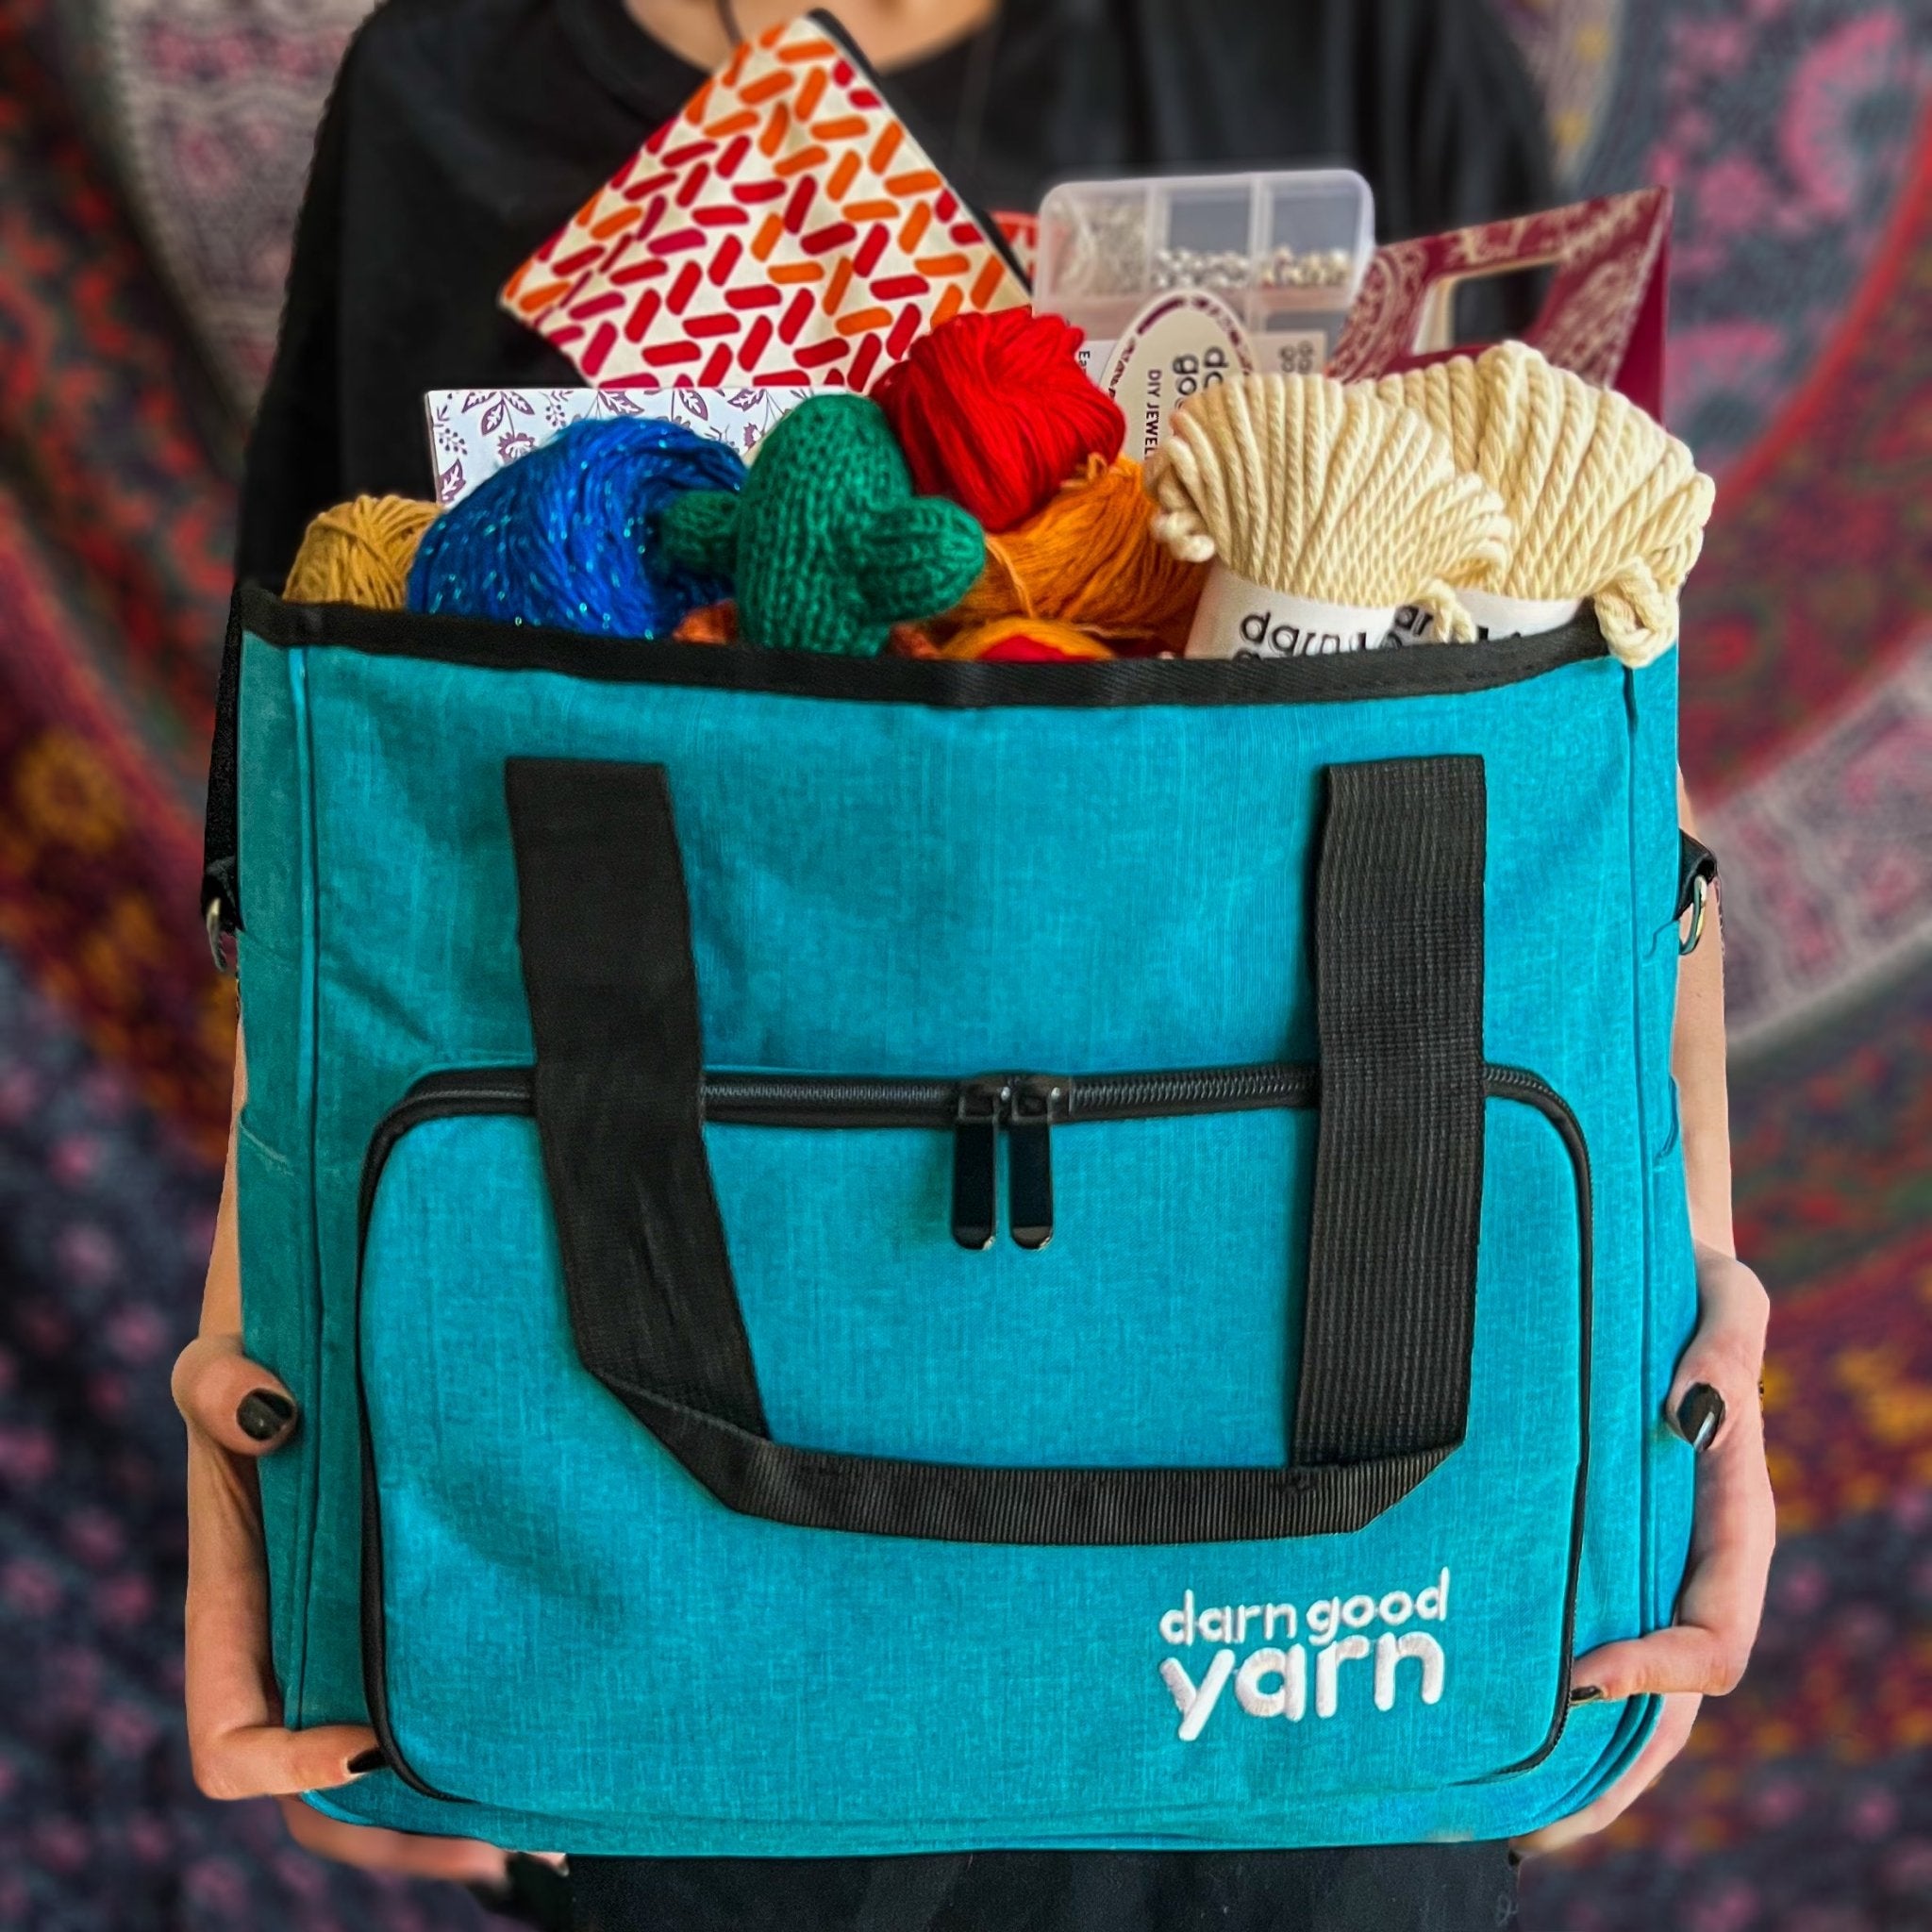 Best Knitting Bag for Yarn Storage. Portable Light and Easy to Carry